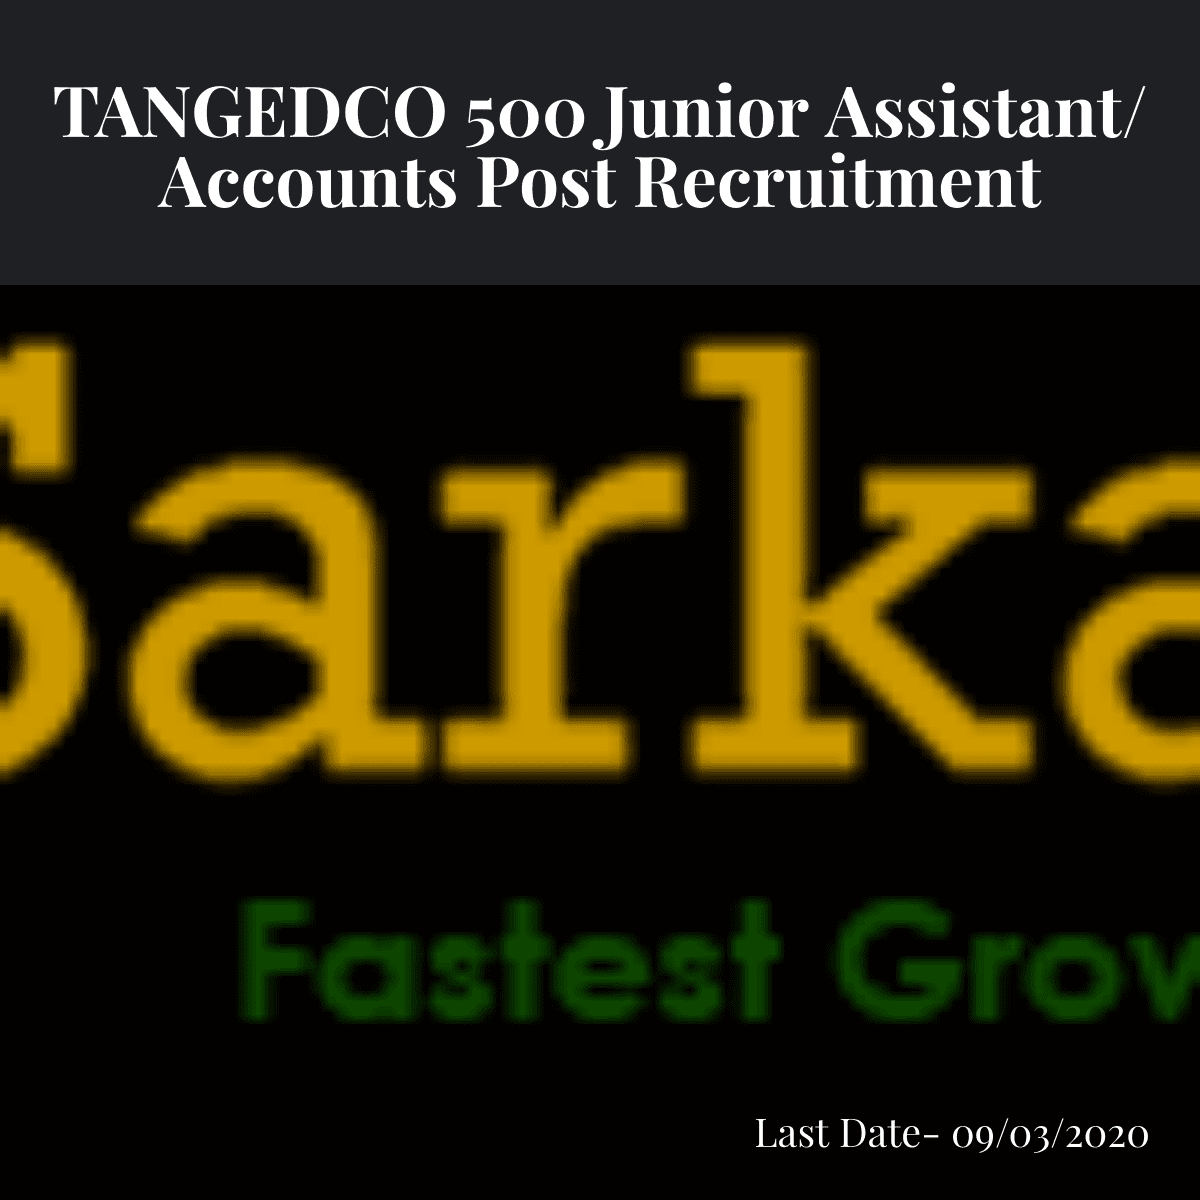 TANGEDCO Recruitment 2020 For Junior Assistant/ Accounts Post